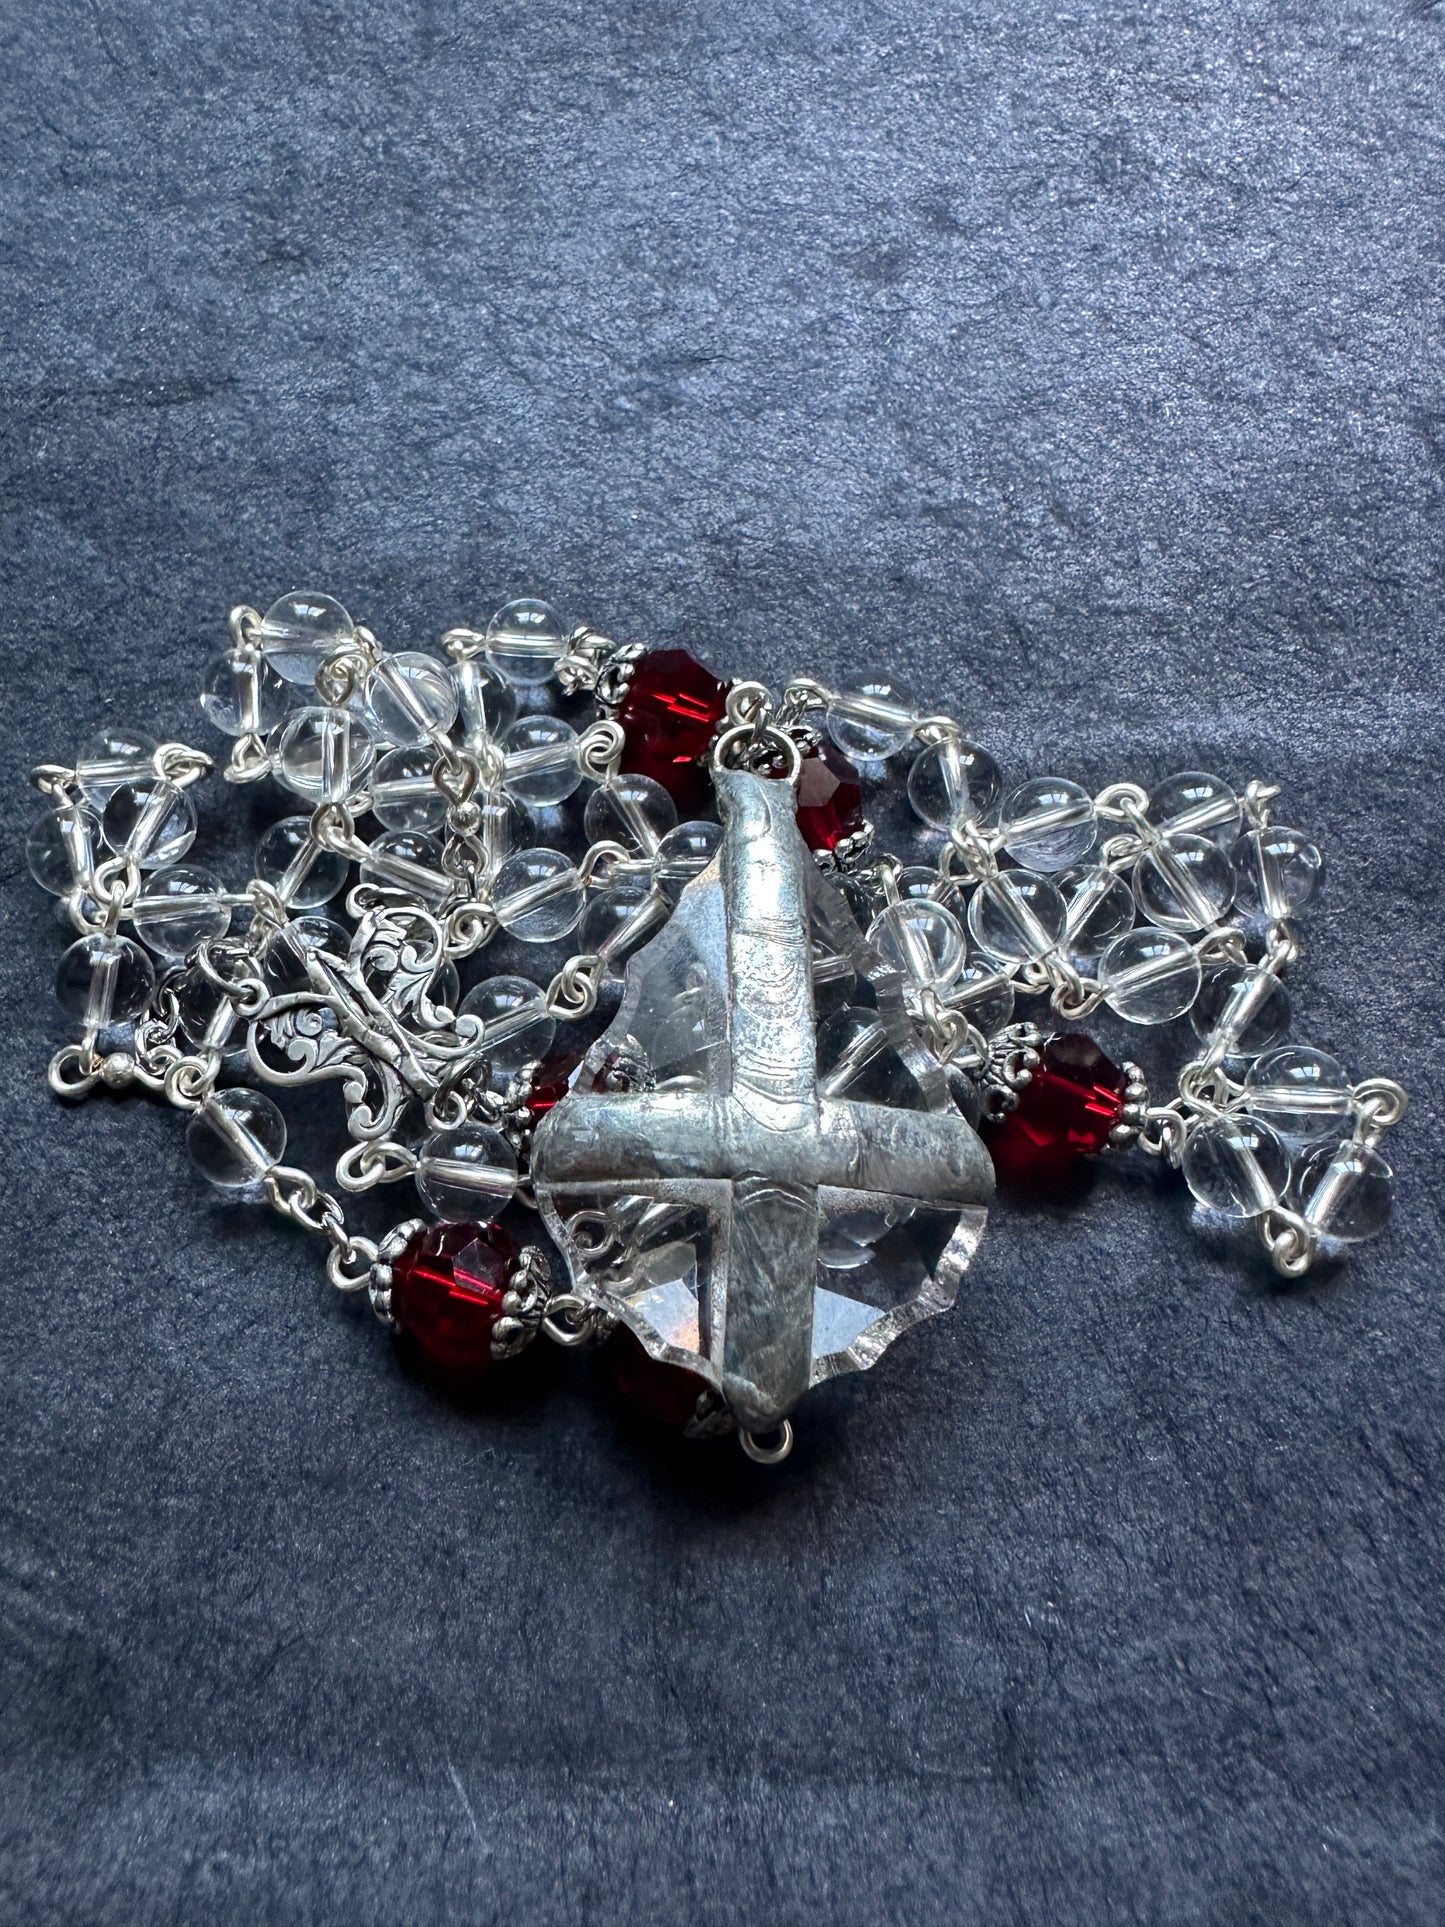 Quartz bead rosary with cut glass and silver inverted cross